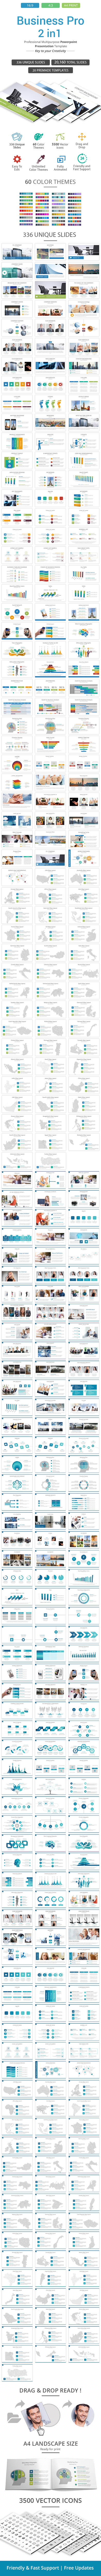 Business Pro - 2 in 1 PowerPoint Template Bundle